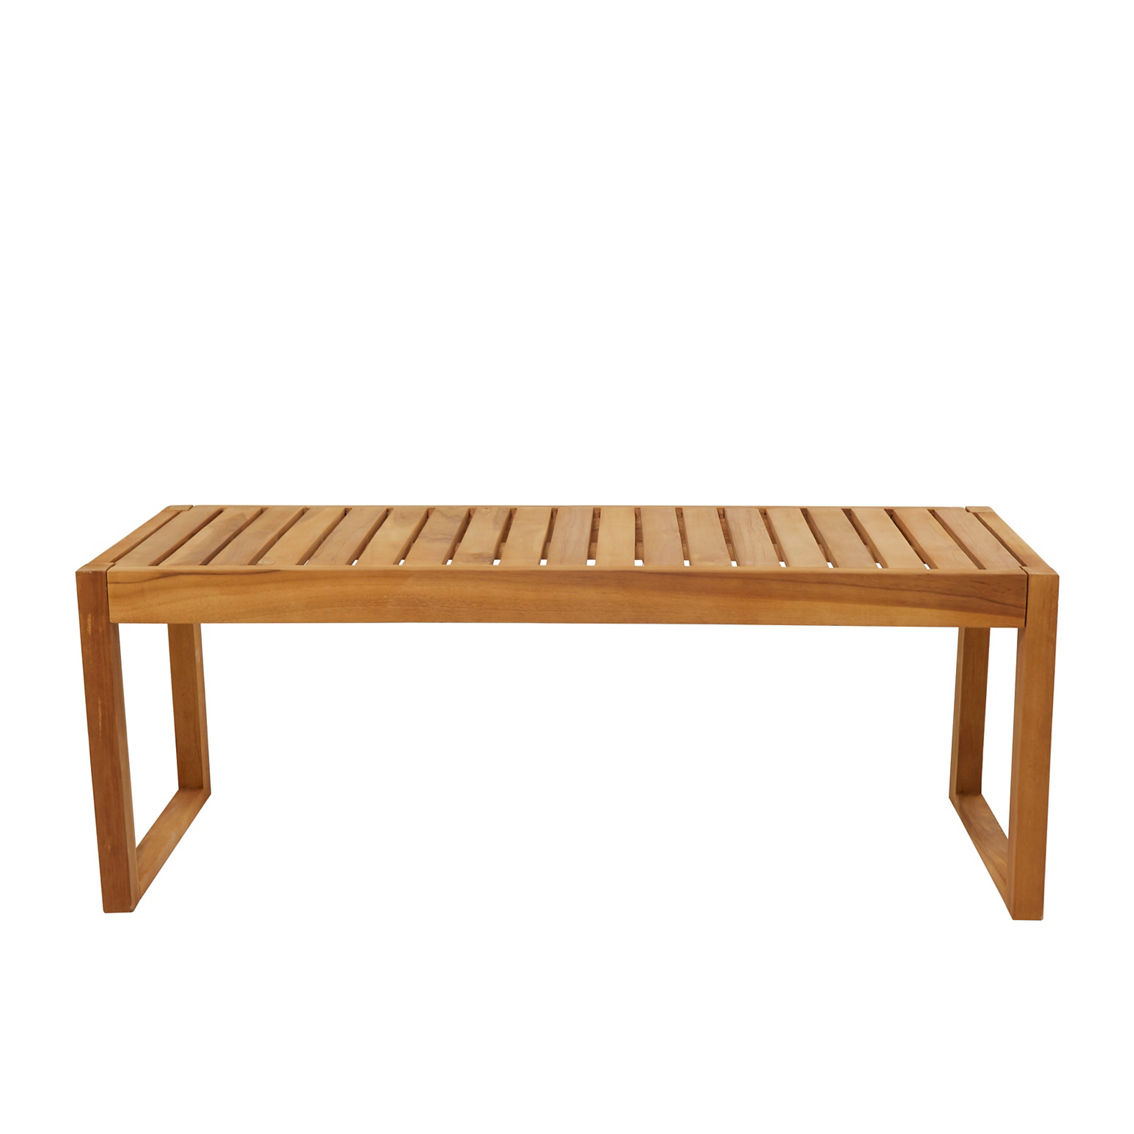 Morgan Hill Home Contemporary Brown Teak Wood Outdoor Coffee Table - Image 3 of 5